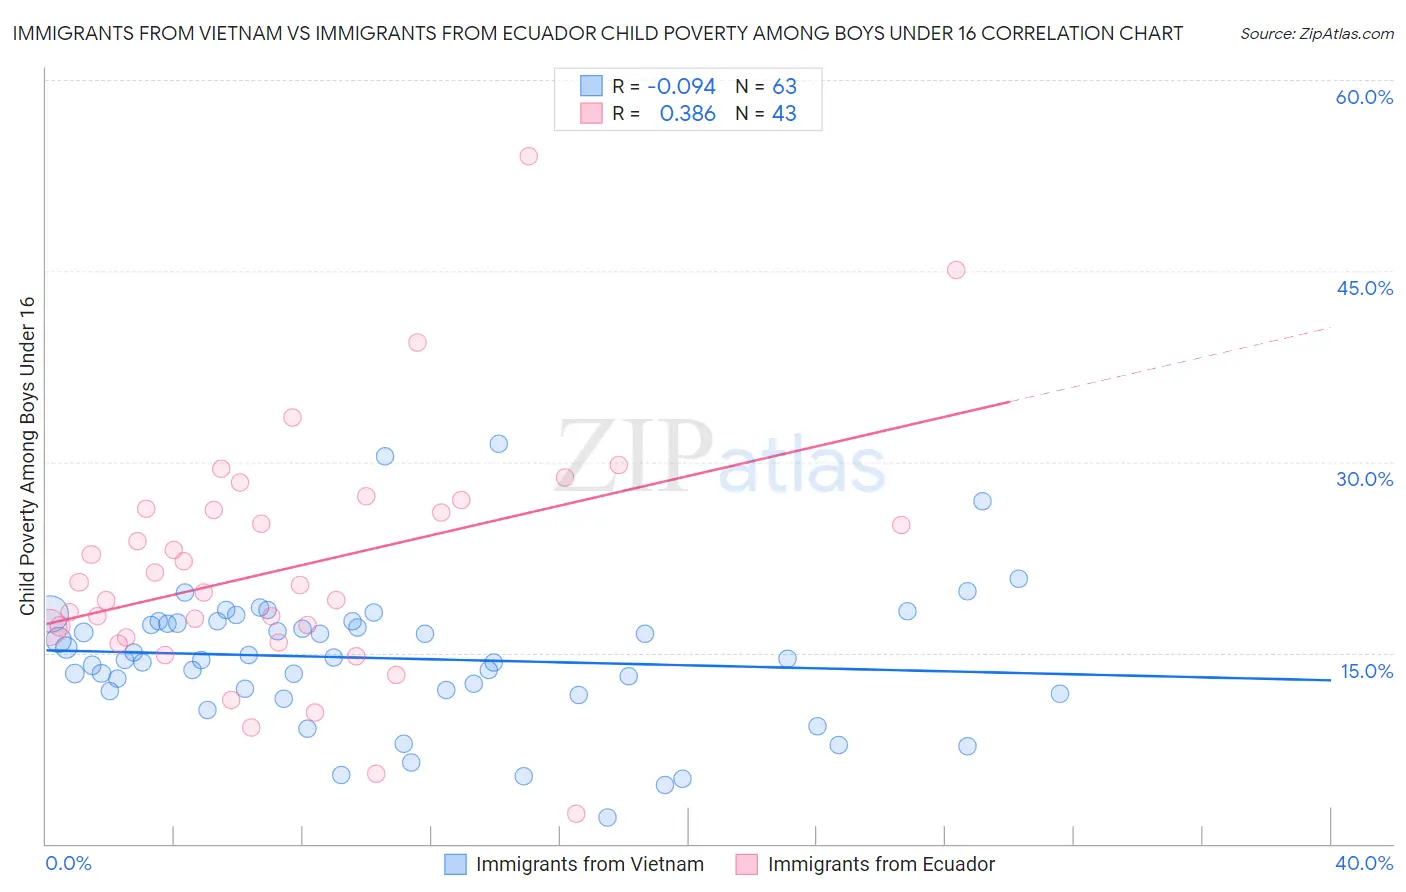 Immigrants from Vietnam vs Immigrants from Ecuador Child Poverty Among Boys Under 16